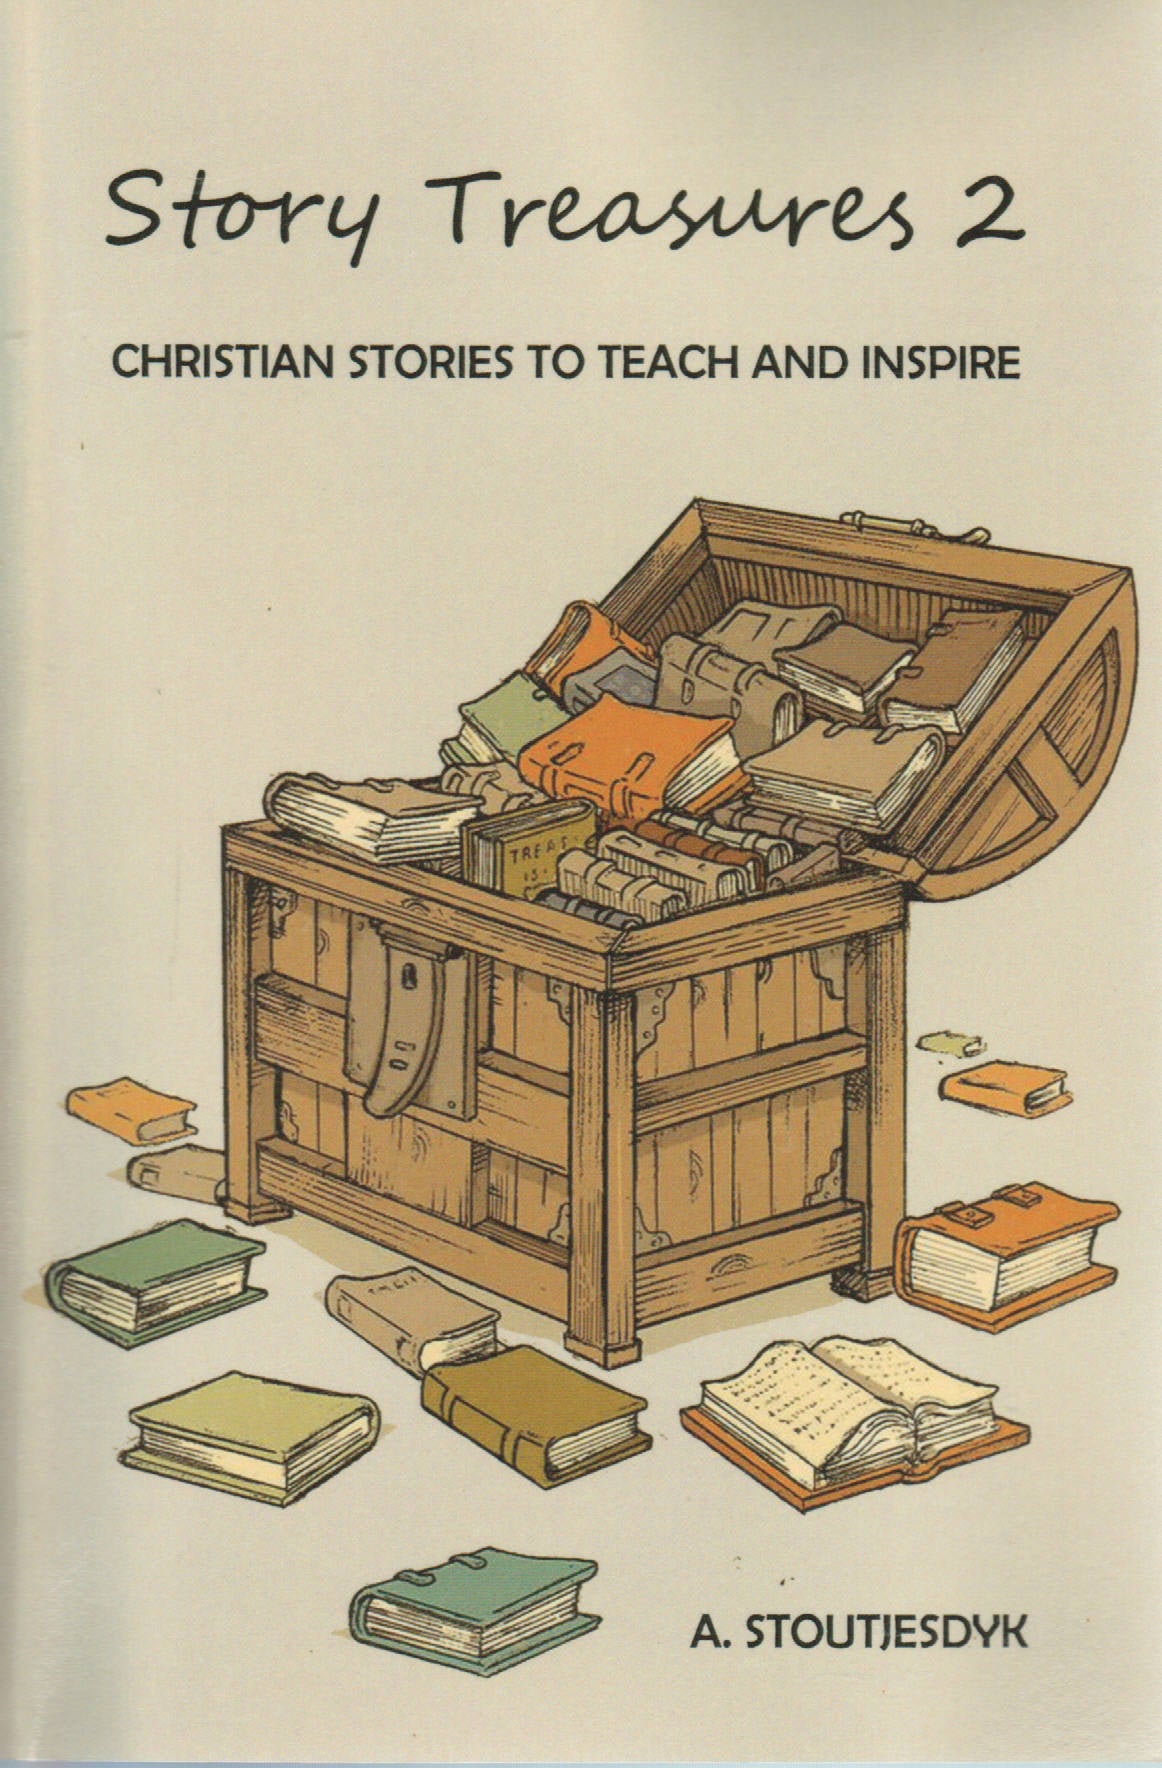 Story Treasures 2: Christian Stories to Teach and Inspire